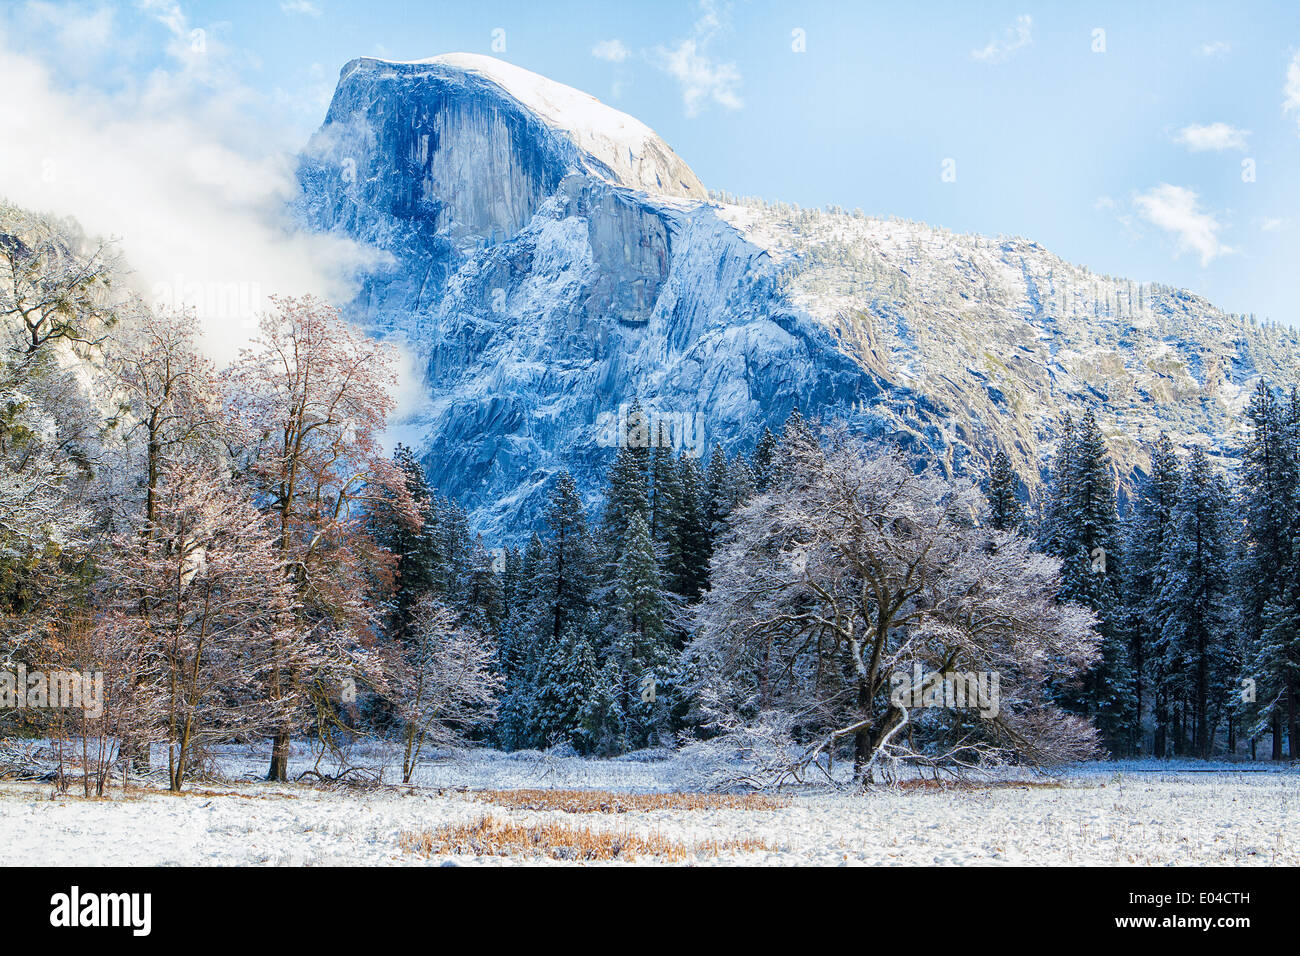 Half Dome in Yosemite National Park just after a fresh snowfall Stock Photo